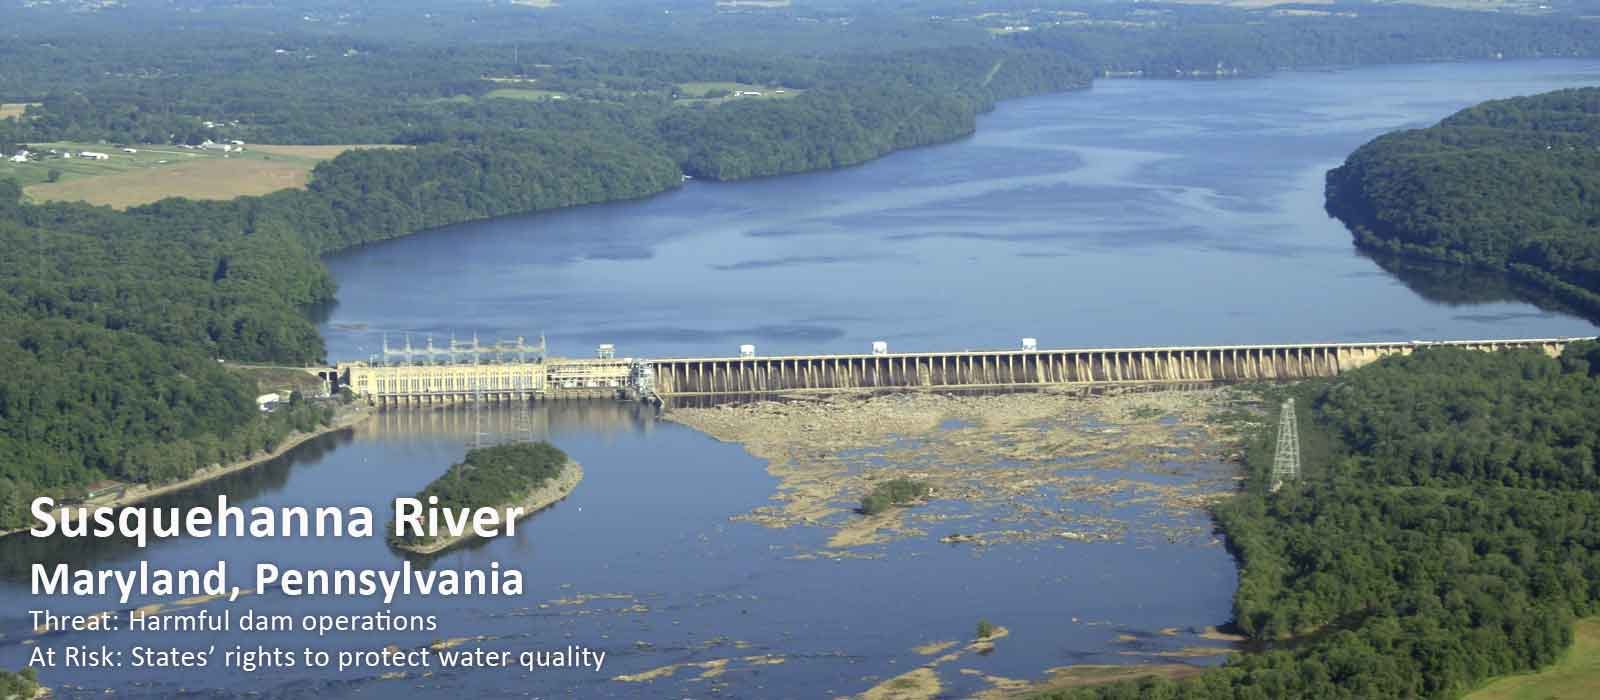 Susquehanna River. Stop the hydropower industry loopholes.